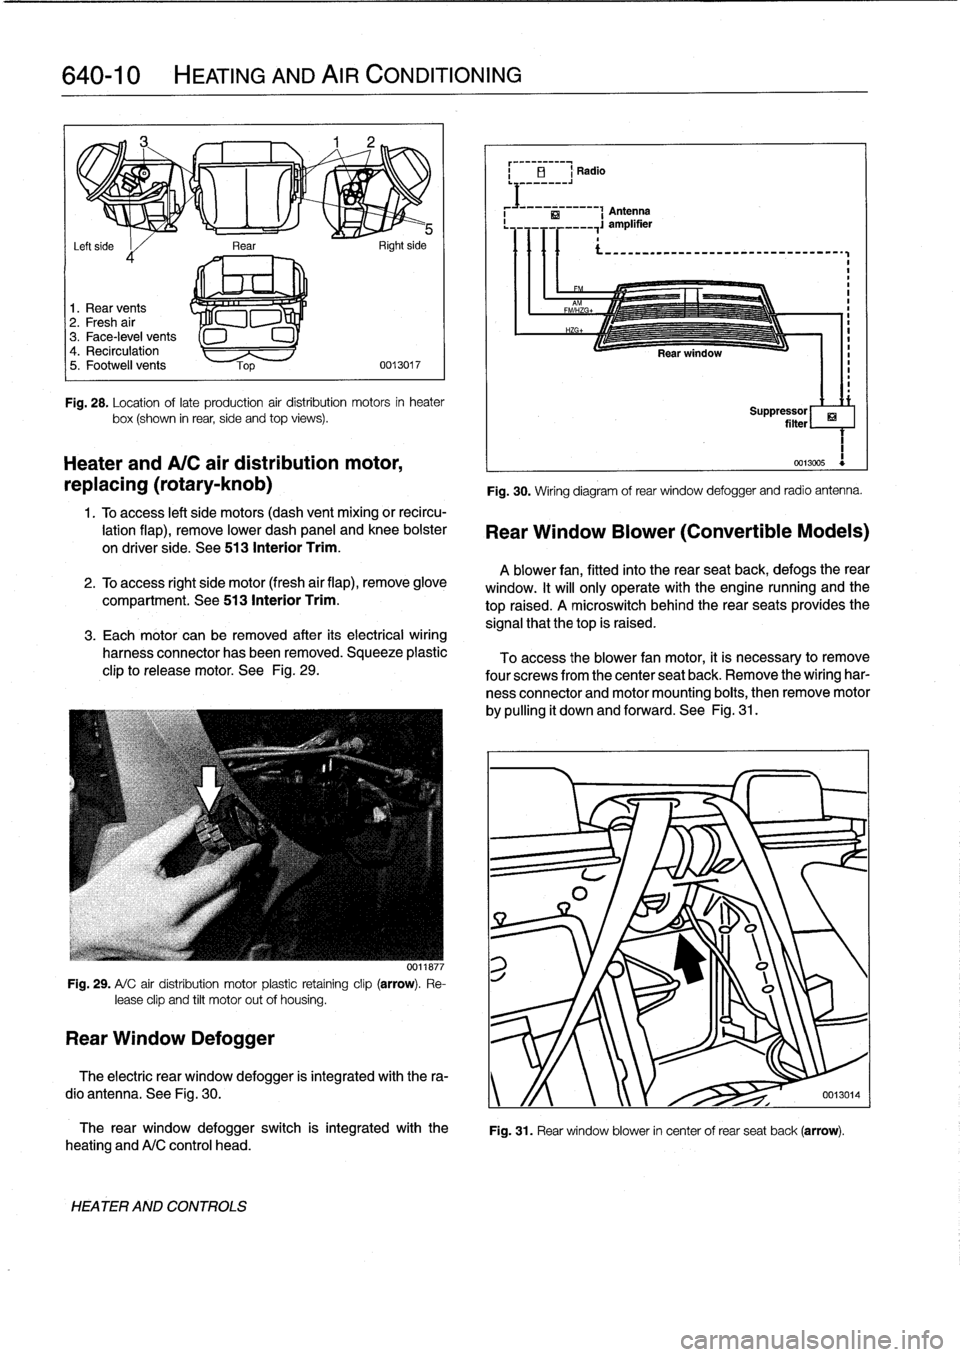 BMW M3 1996 E36 Workshop Manual 
640-10

	

HEATING
AND
AIR
CONDITIONING

i

El
Radio

Antenna

Rear

	

.
,

	

si,-
Left
side

	

I
d

1
.
Rear
vents
2
.
Fresh
air
3
.
Face-level
vents
4
.
Recirculation
5
.
Footwell
vents
0013017
